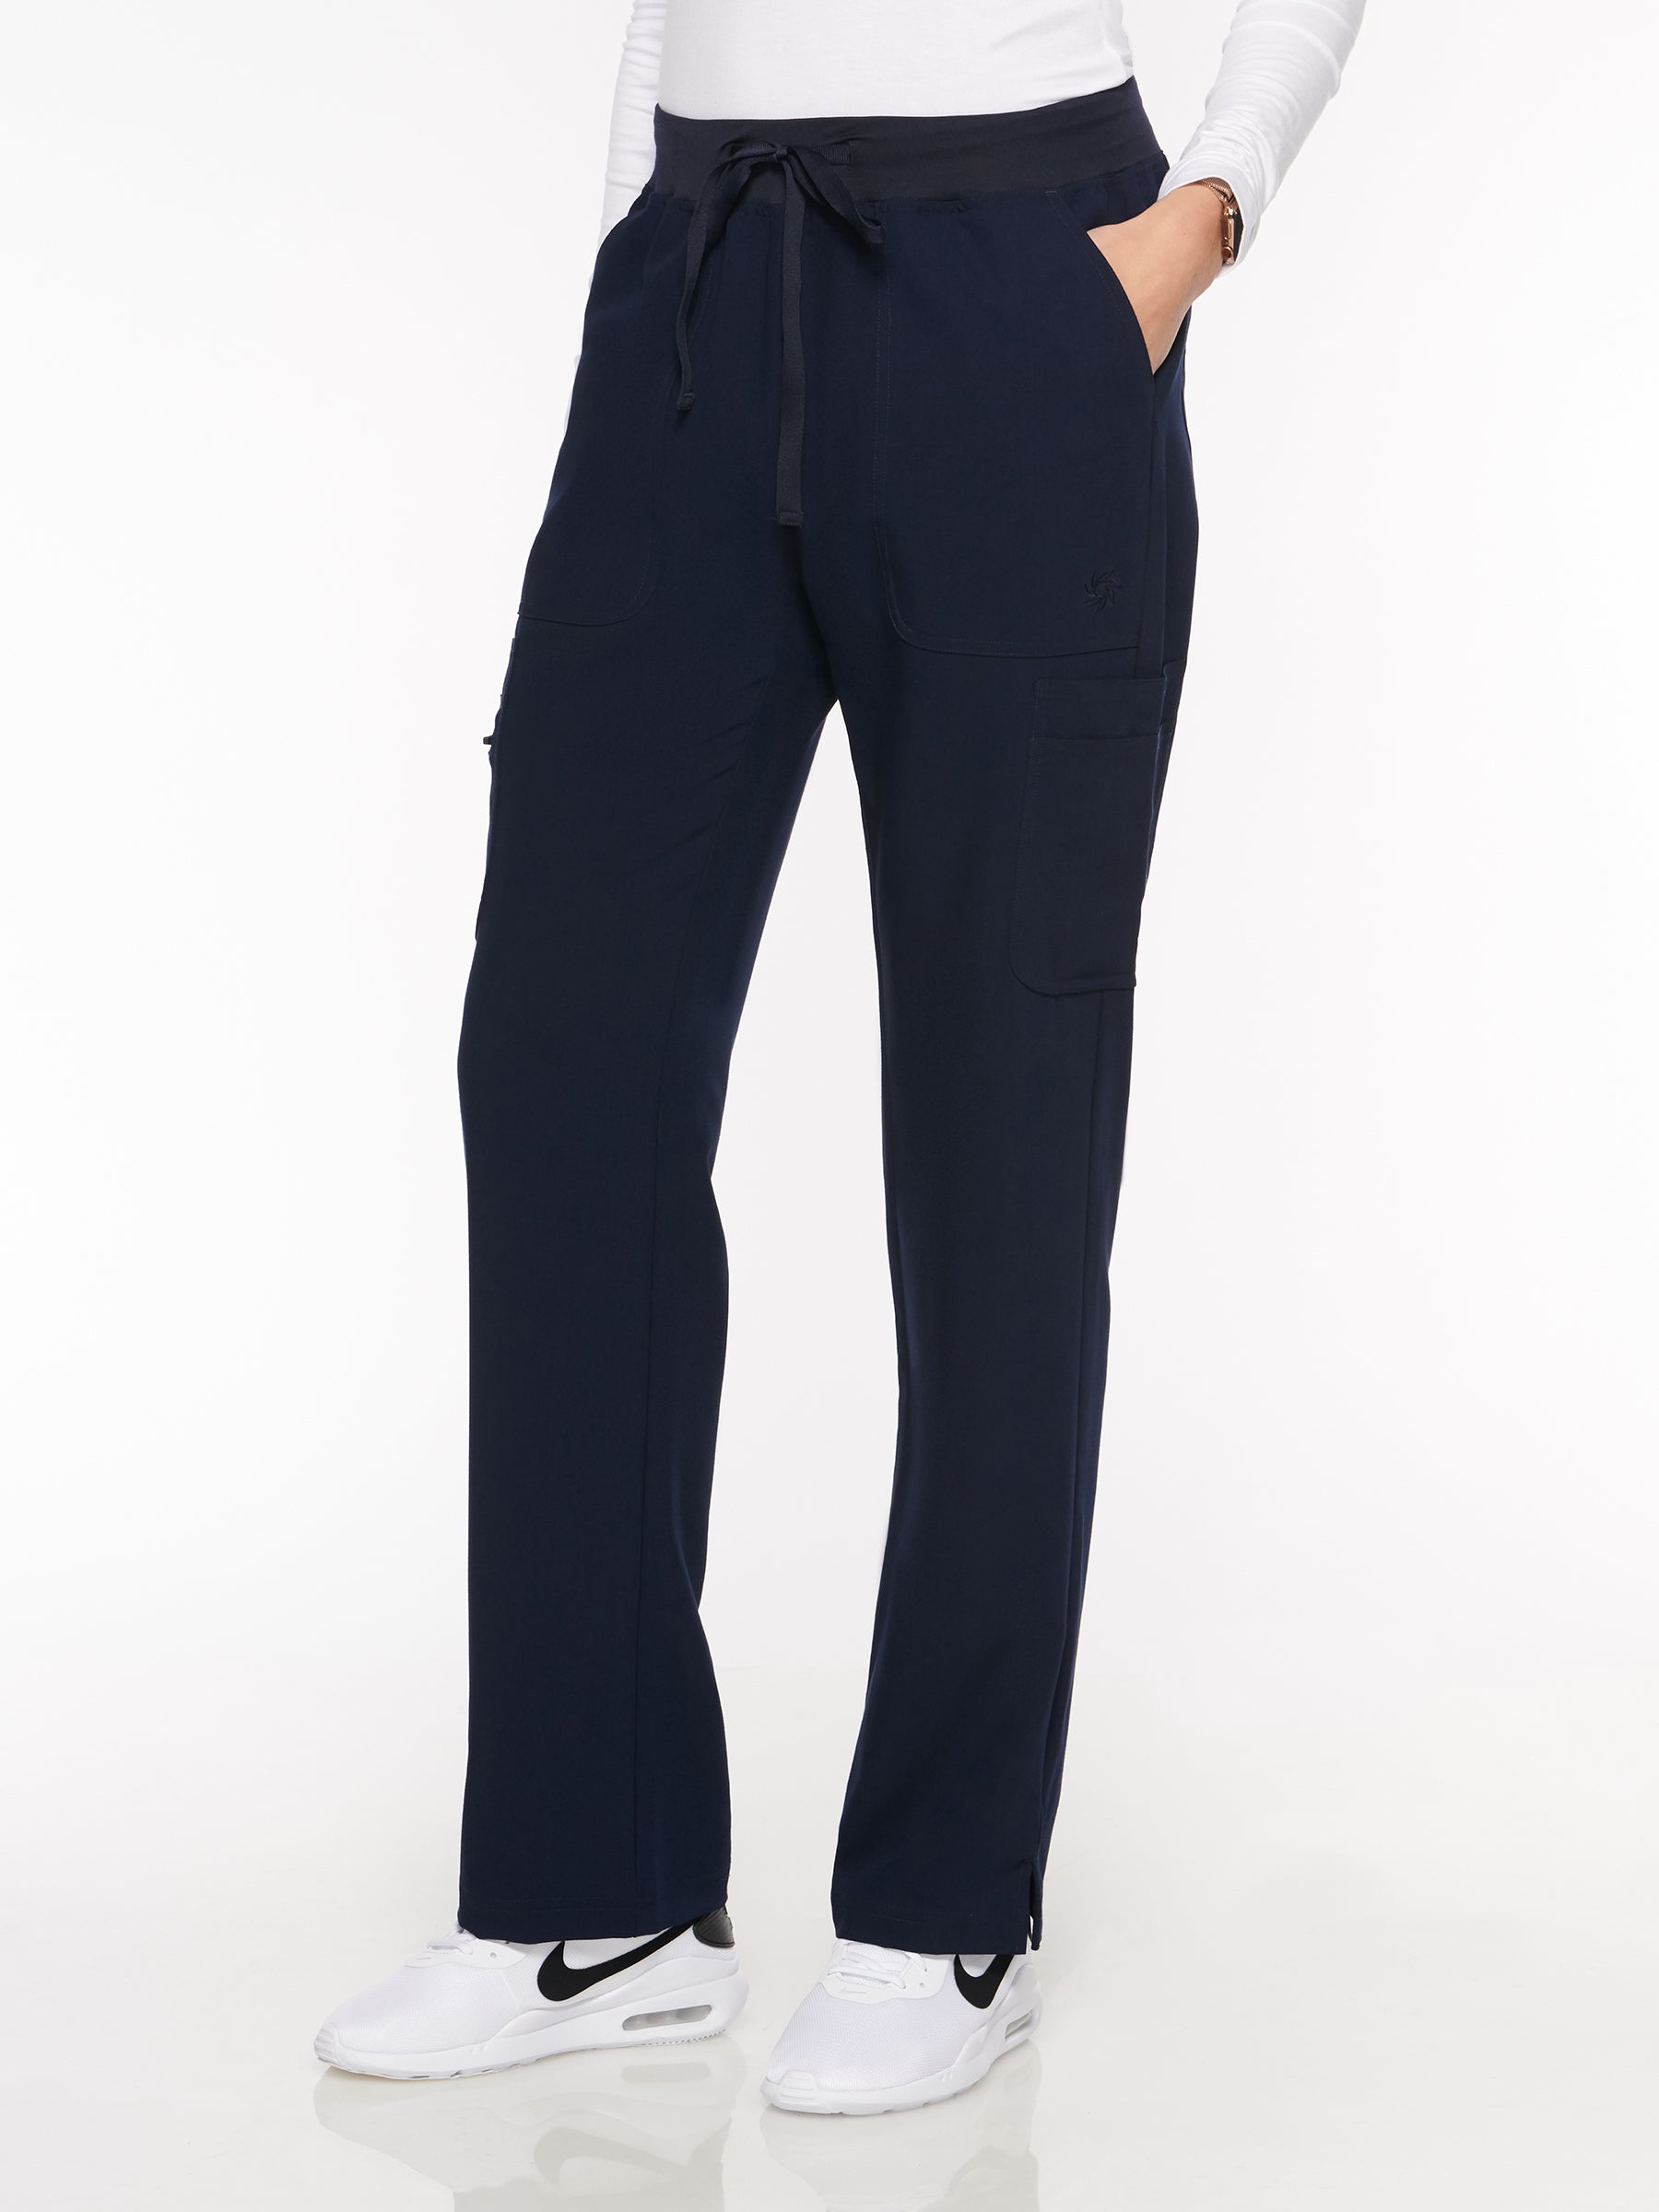 Pacific Womens Pant Yoga Pant with 9 Pockets - Regular (93002R)